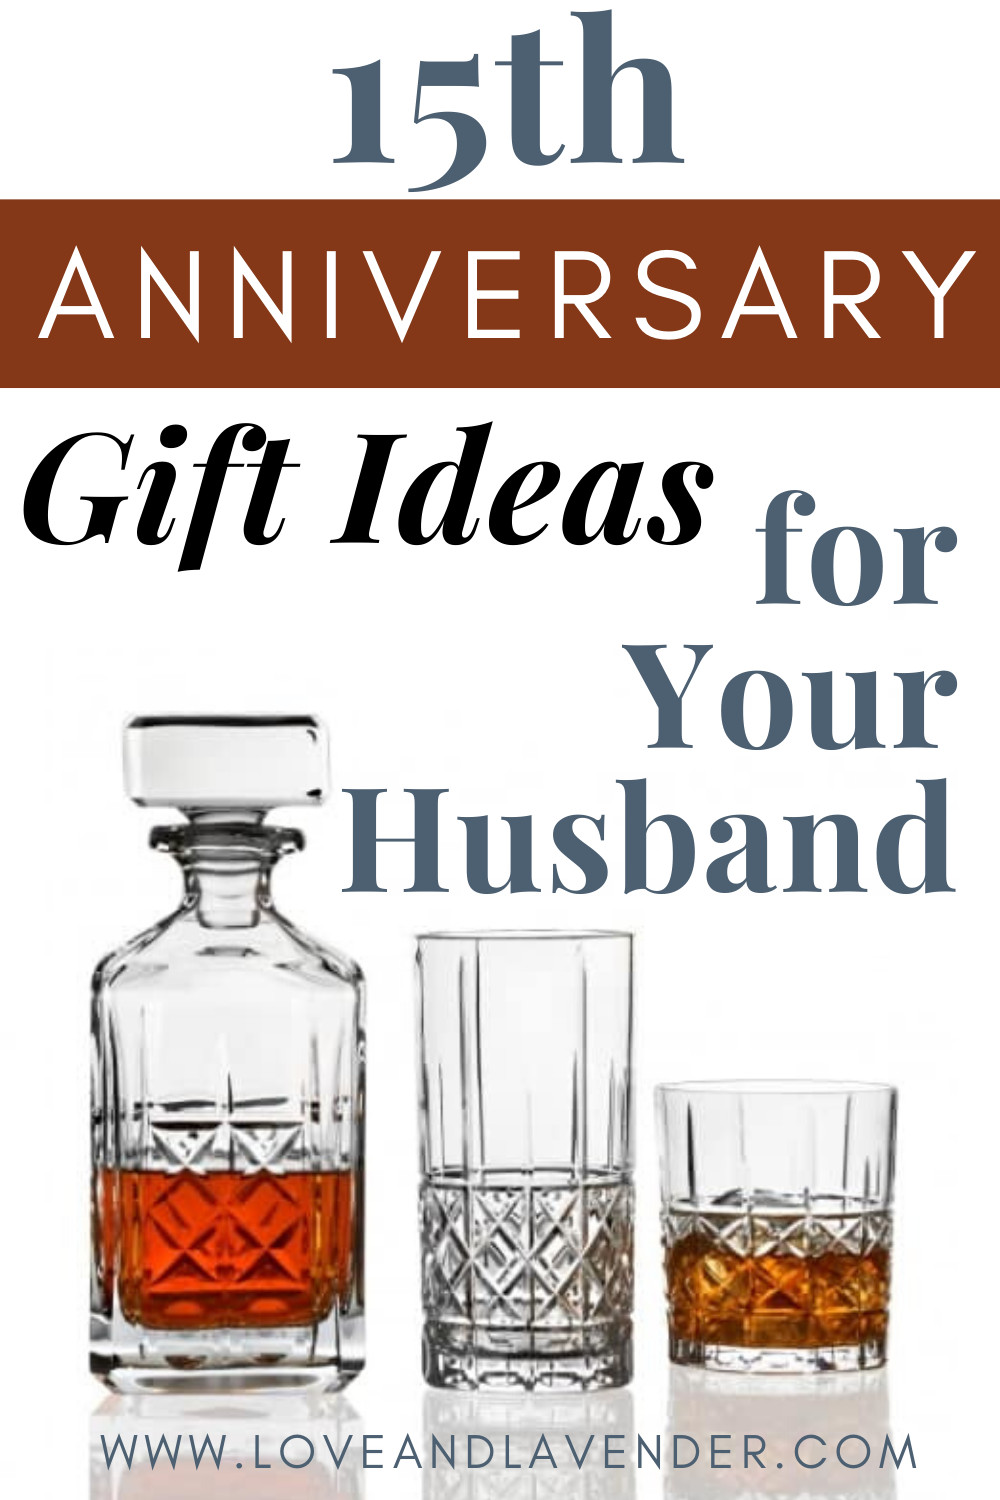 15Th Anniversary Gift Ideas For Him
 19 Crystal Gifts That Sparkle for a 15th Year Anniversary